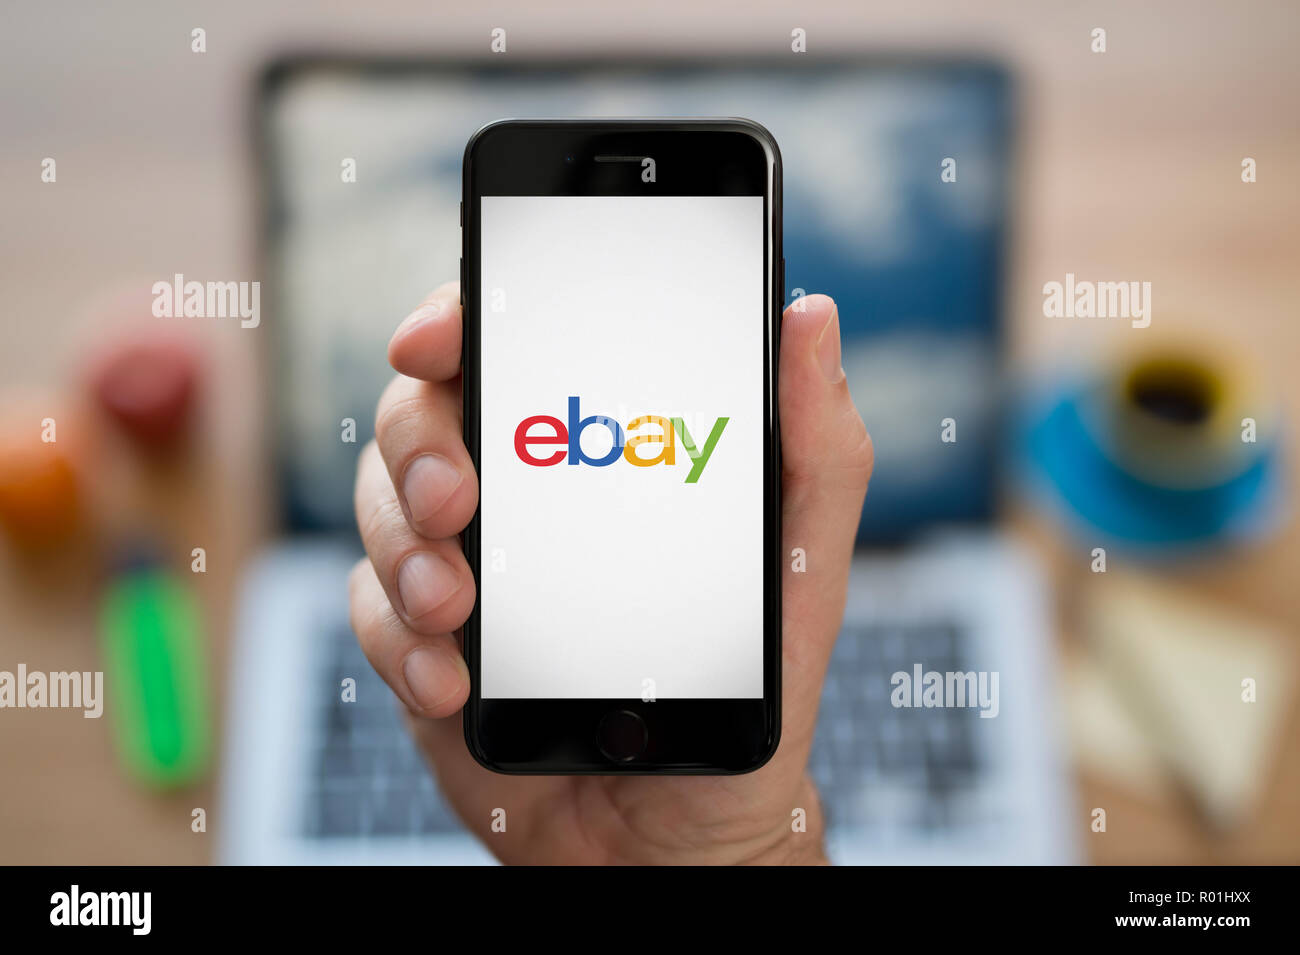 A man looks at his iPhone which displays the ebay logo, while sat at his computer desk (Editorial use only). Stock Photo